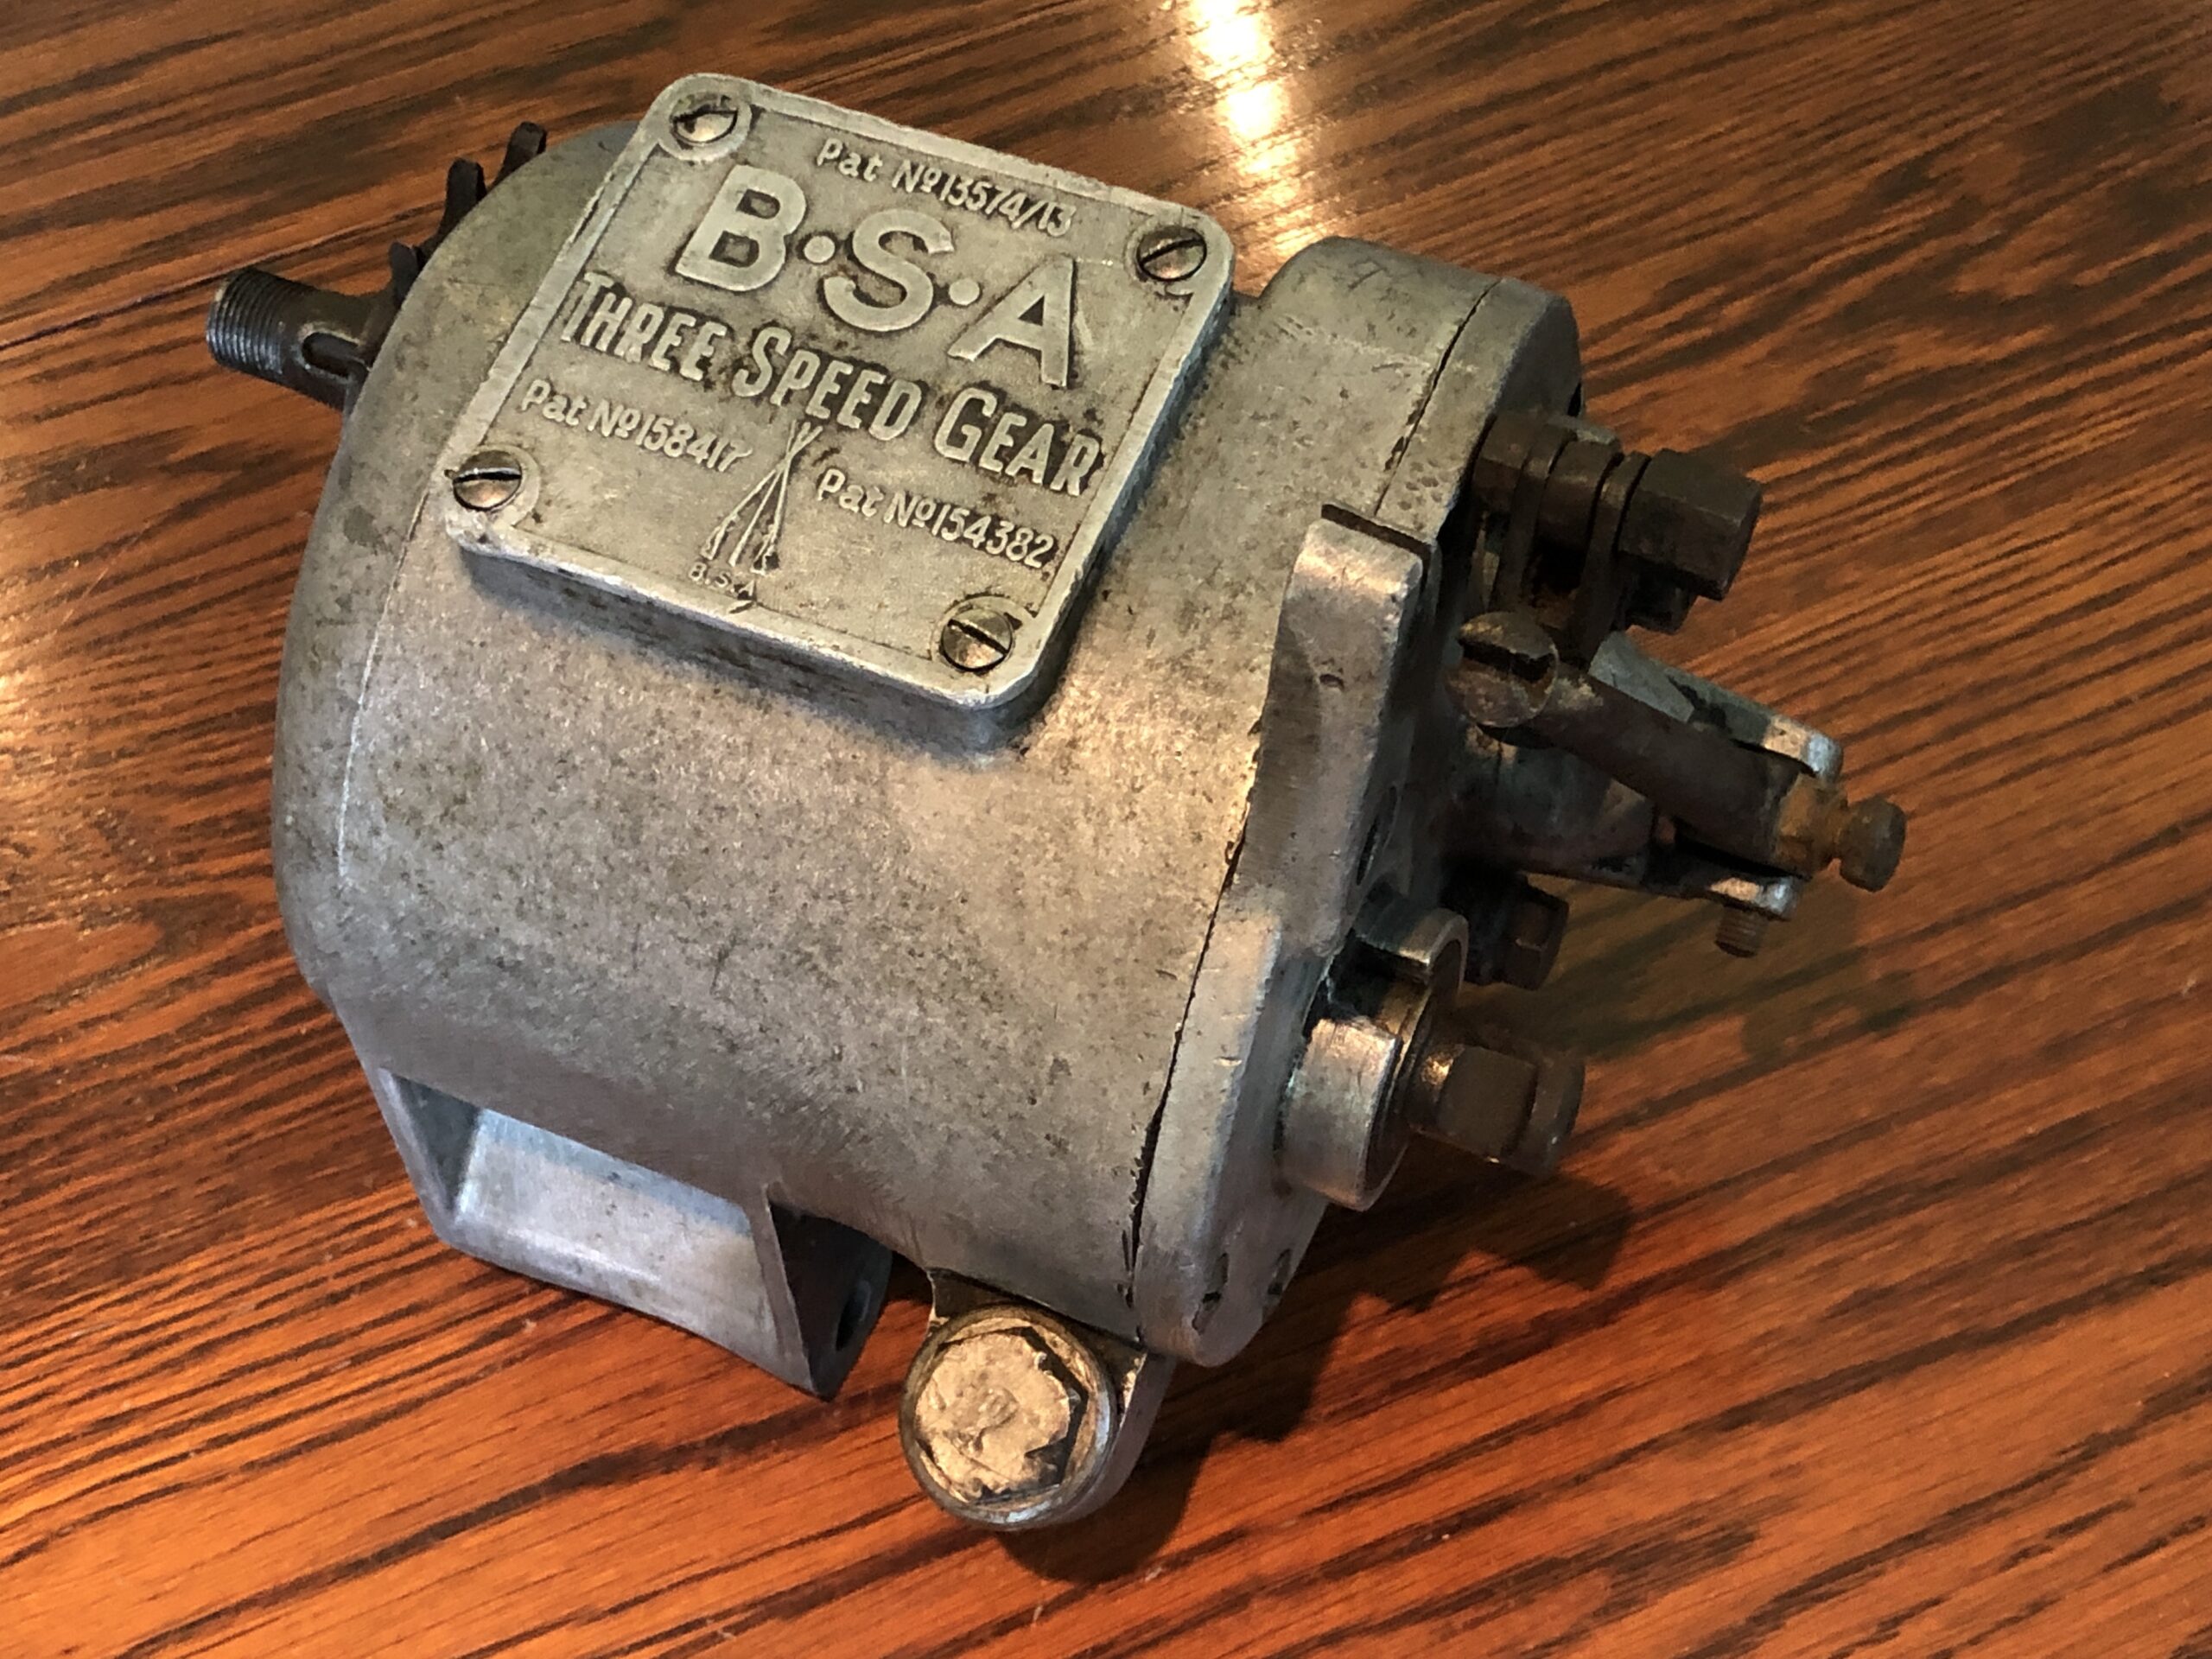 1920s L-Series BSA 3 Speed hand change gearbox for flat tank motorcycles. This early 3.5 HP BSA transmission is for the Models: L, LP, HP, L29, L30, L31.